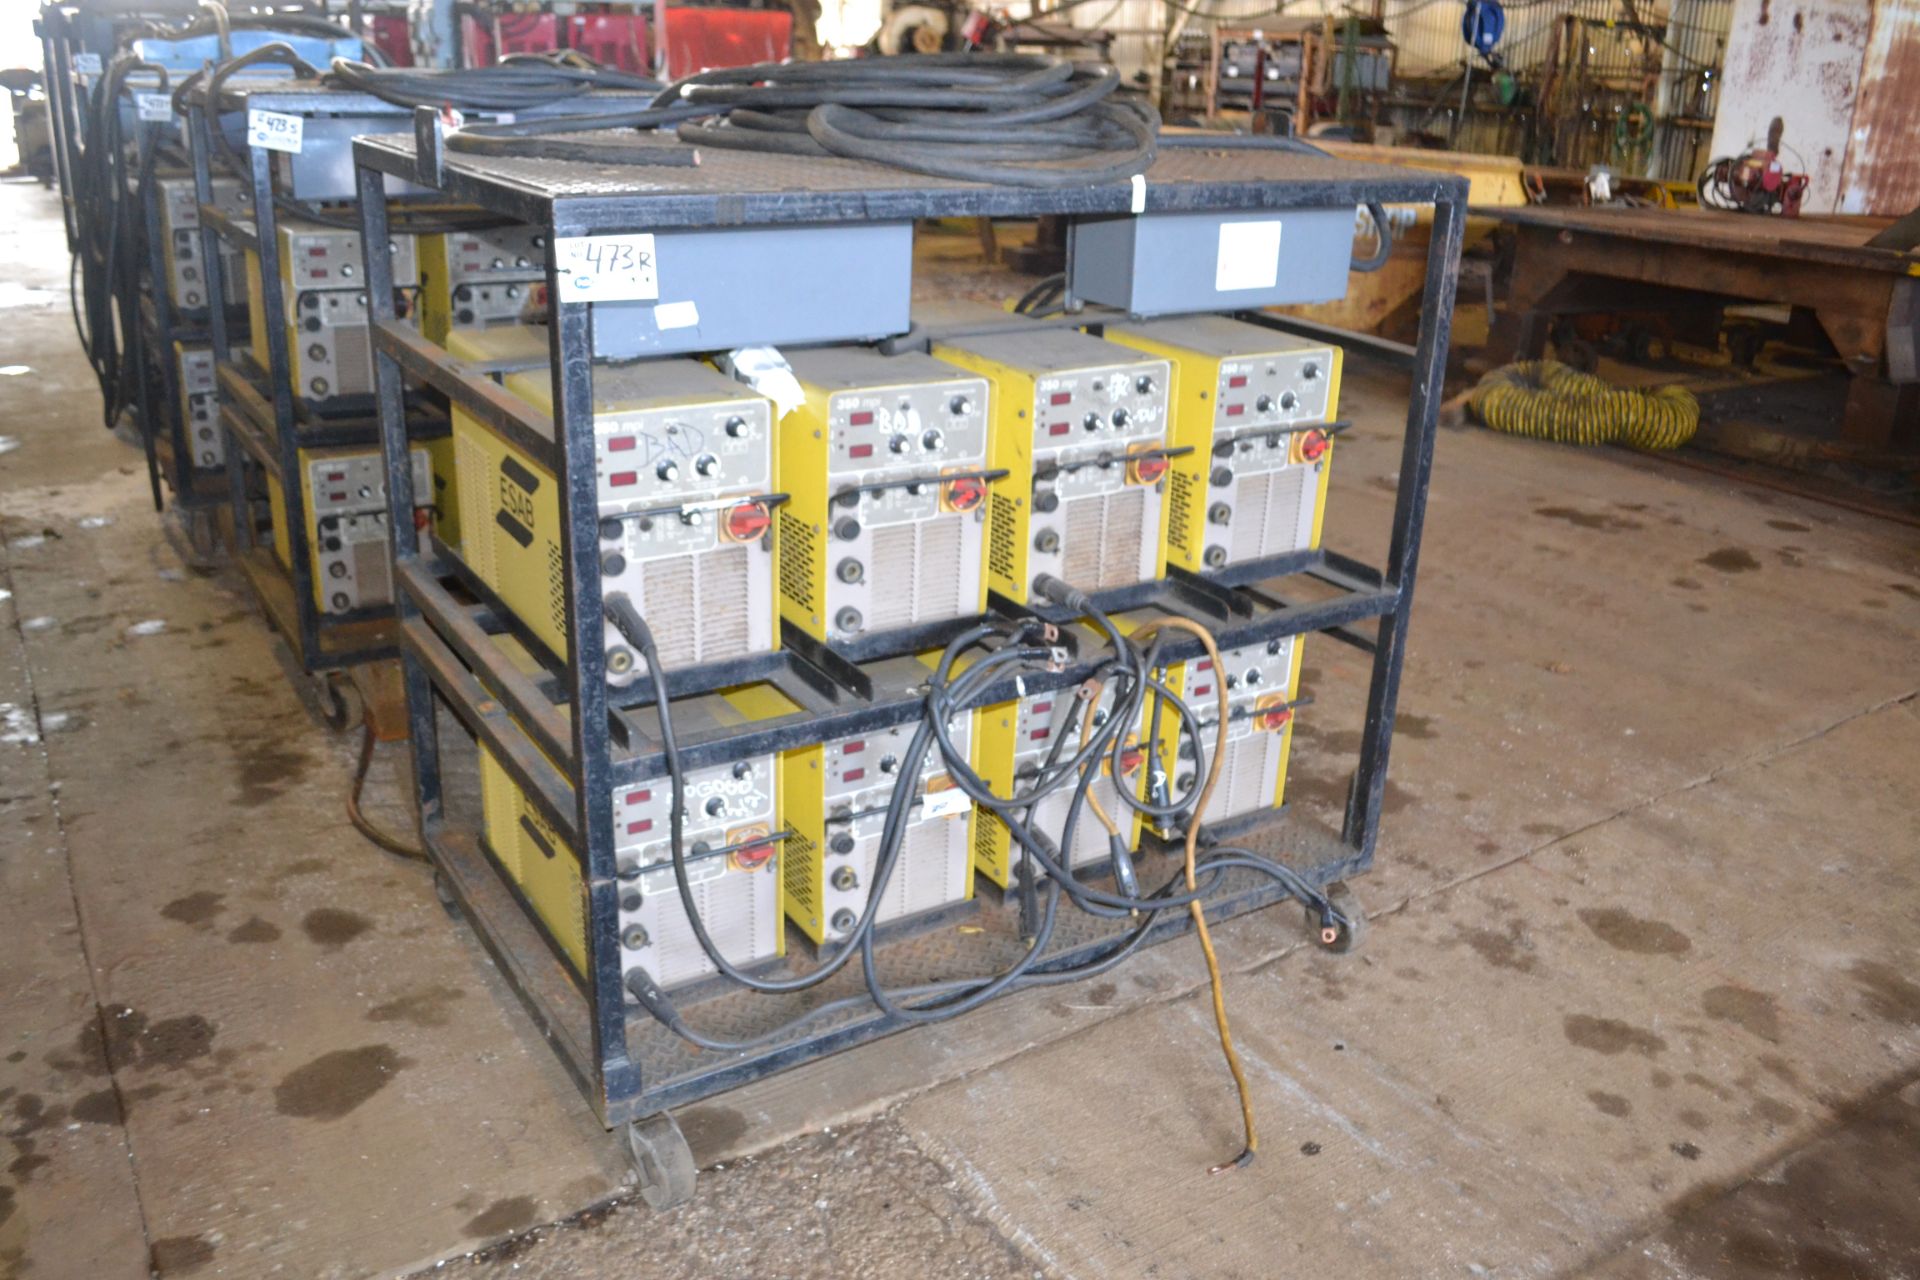 (8) Esab 350 MPI Welders with Breaker Boxes on Steel Cart with Casters